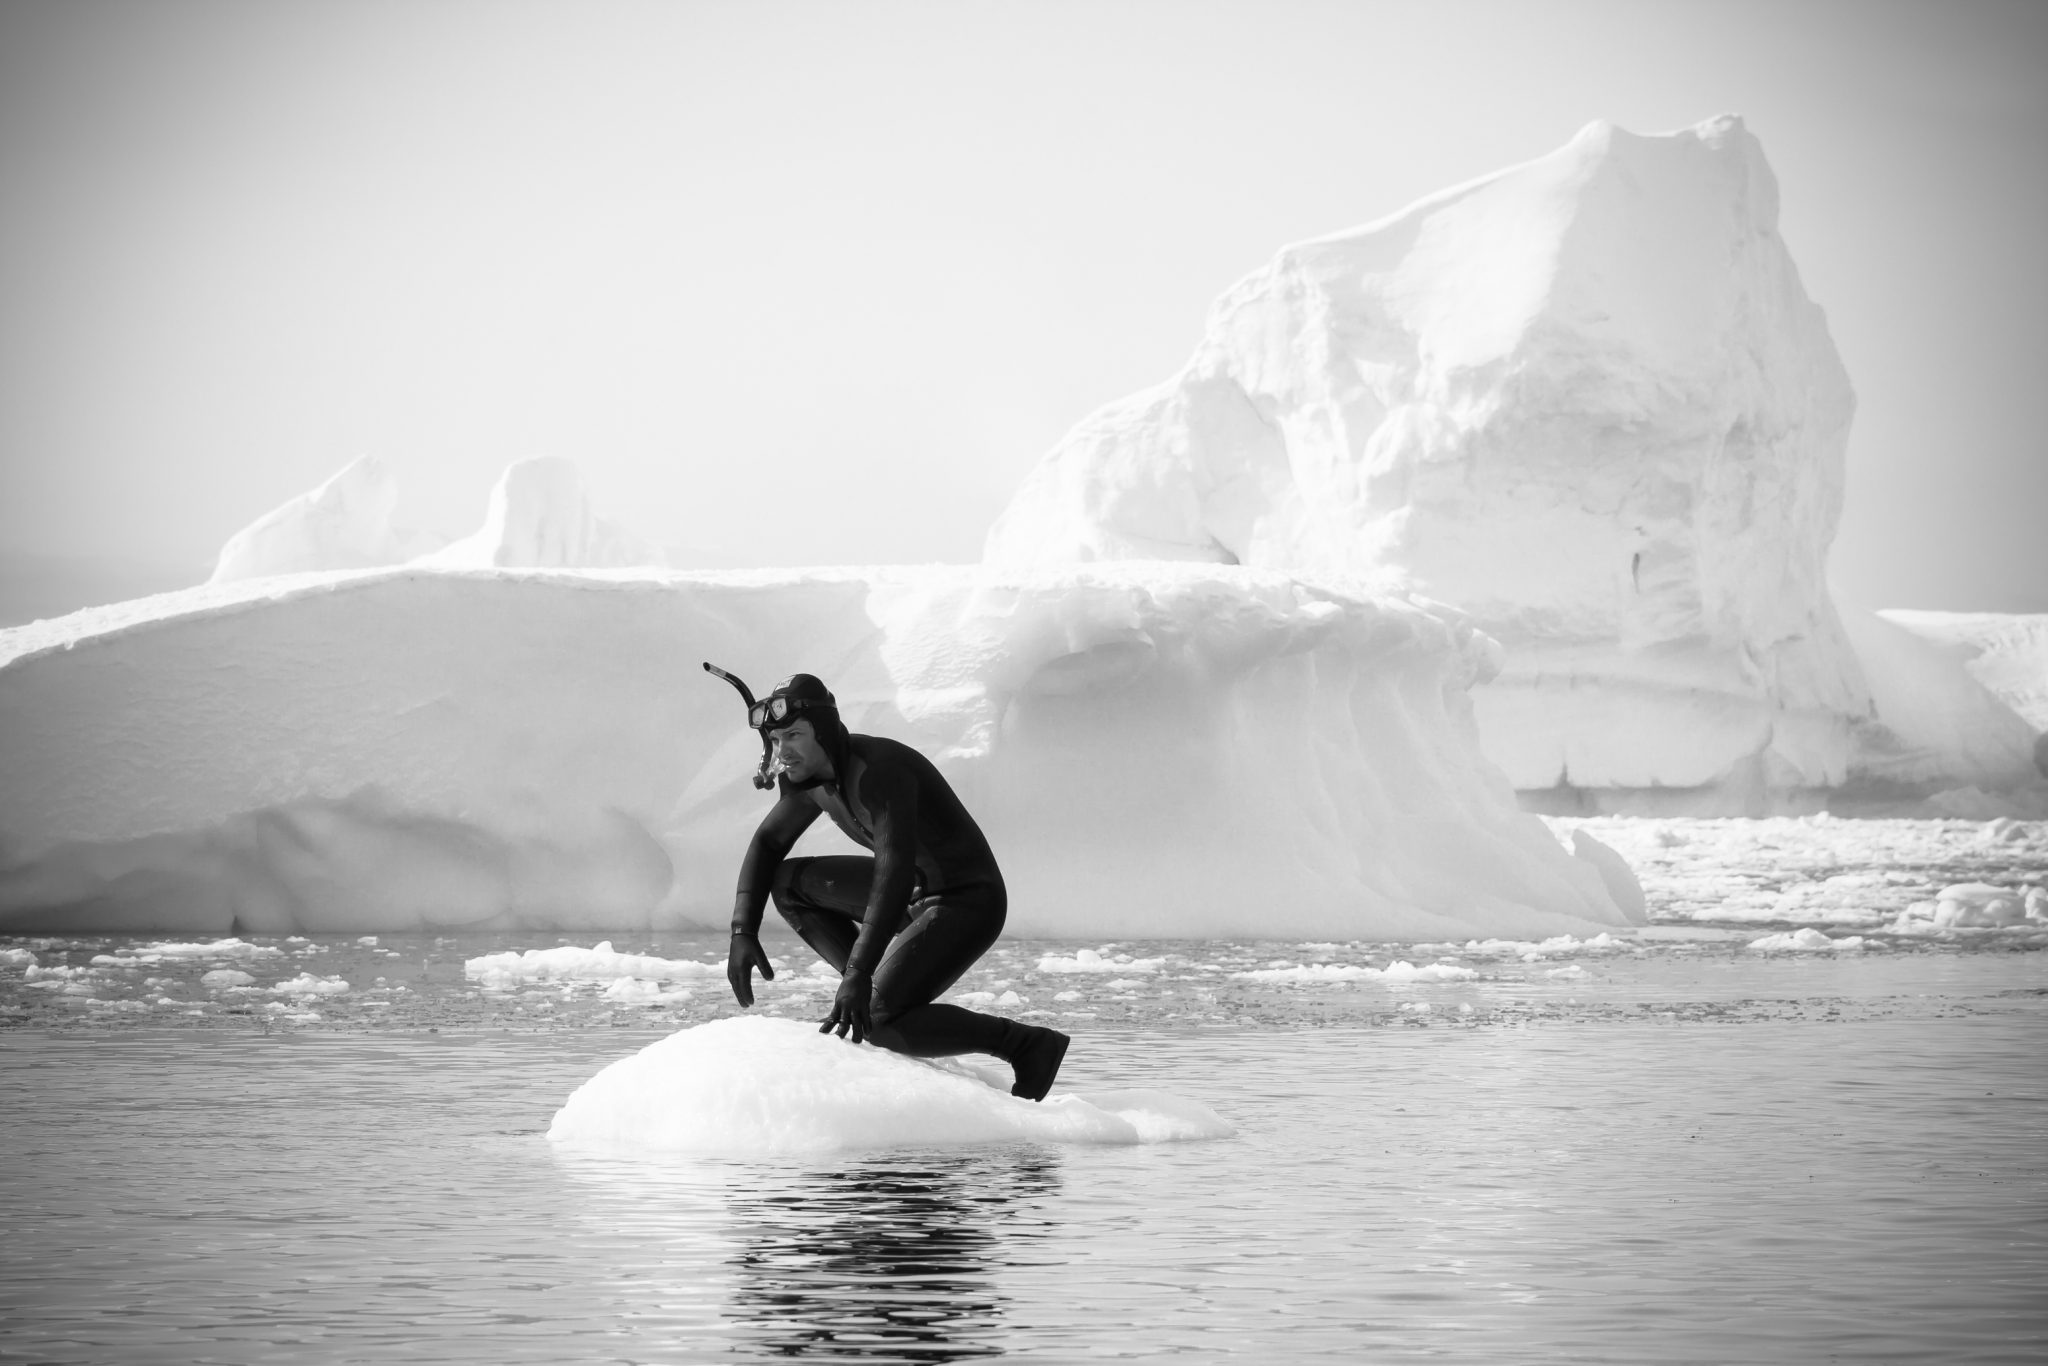 diving with endangered species in Antarctica, a hotspot for large endangered marine animal